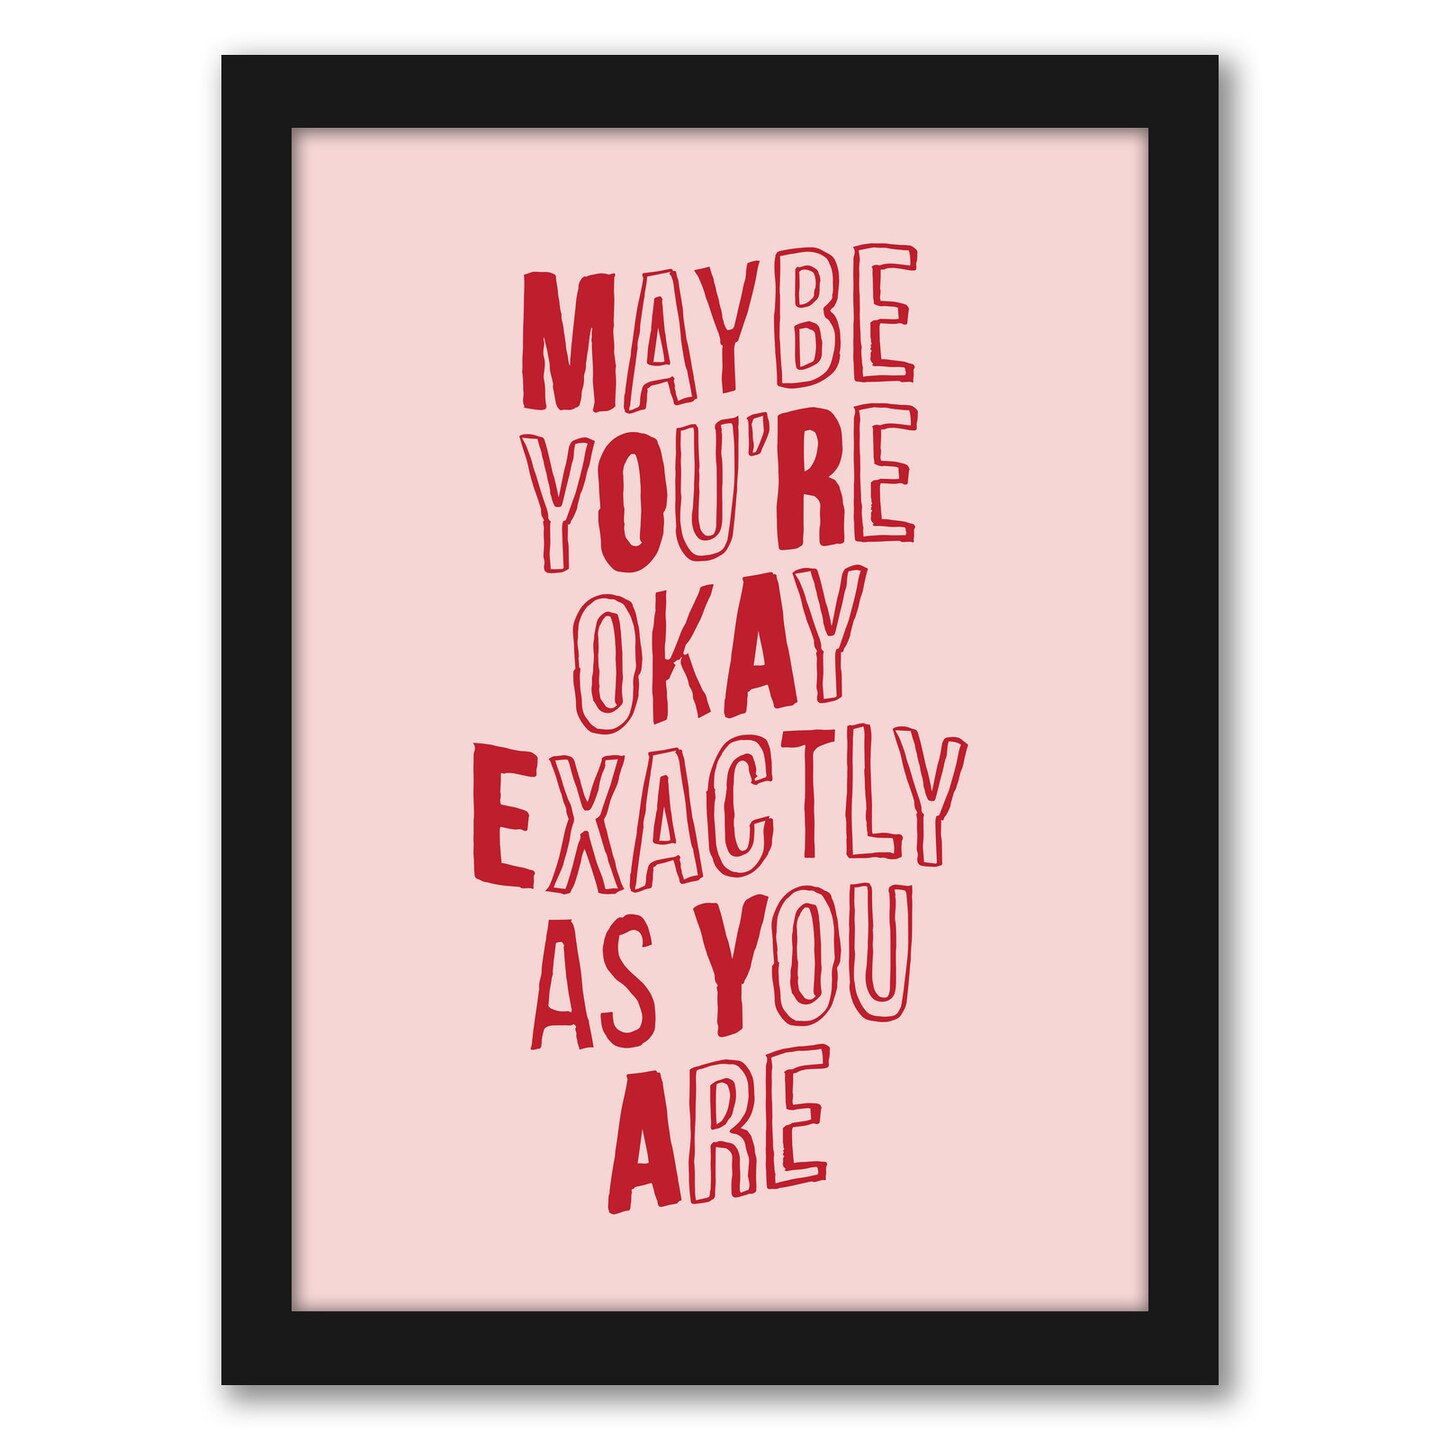 Maybe Youre Okay Exactly As You Are by Motivated Type Frame  - Americanflat